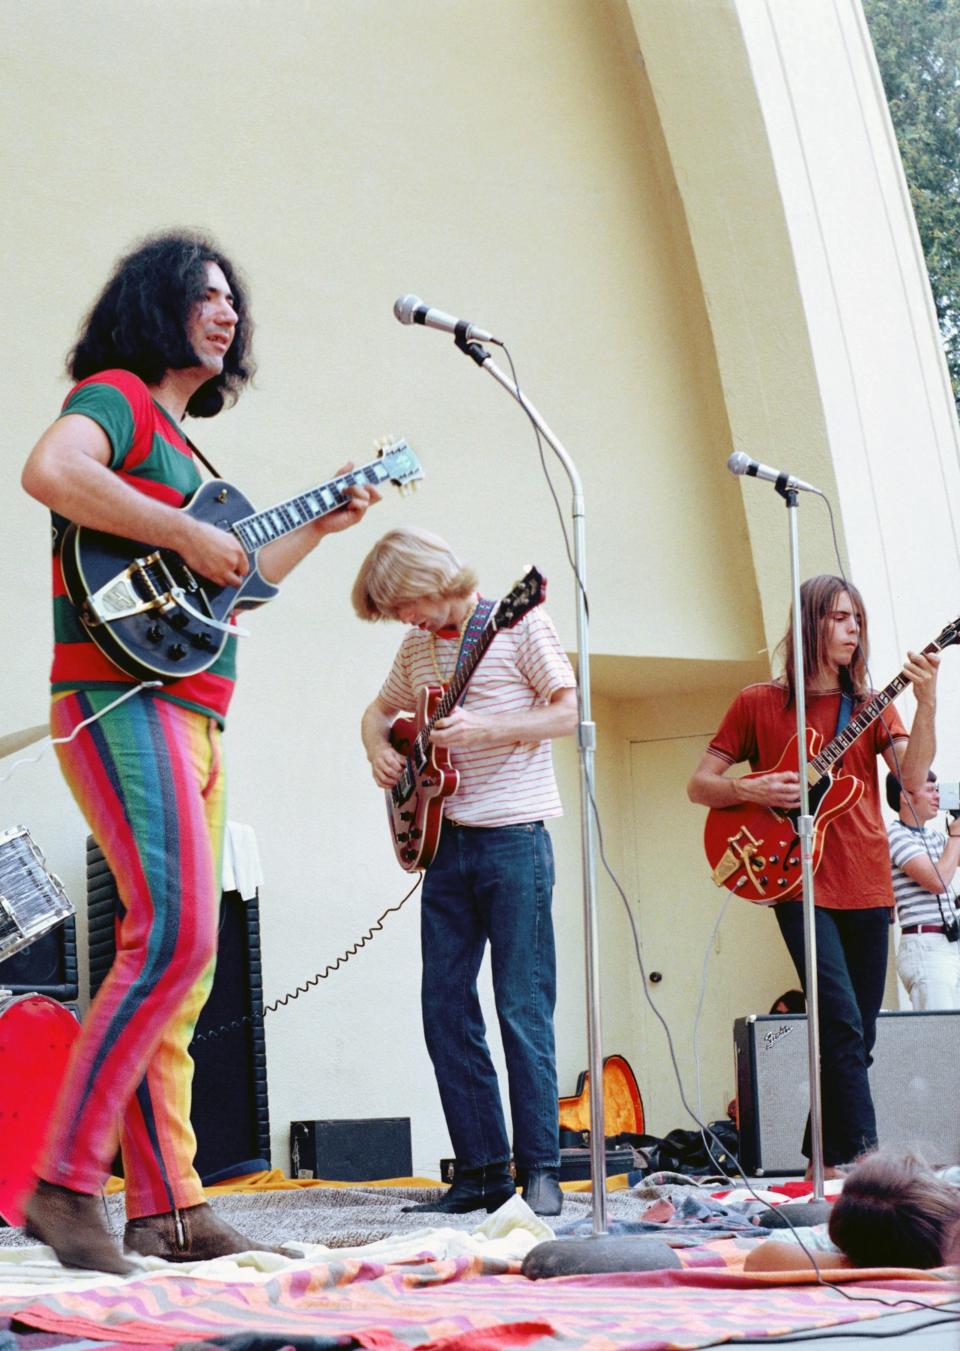 The Grateful Dead (from left: Jerry Garcia, Phil Lesh, and Bob Weir) perform at West Park on August 13, 1967, in Ann Arbor, Michigan.